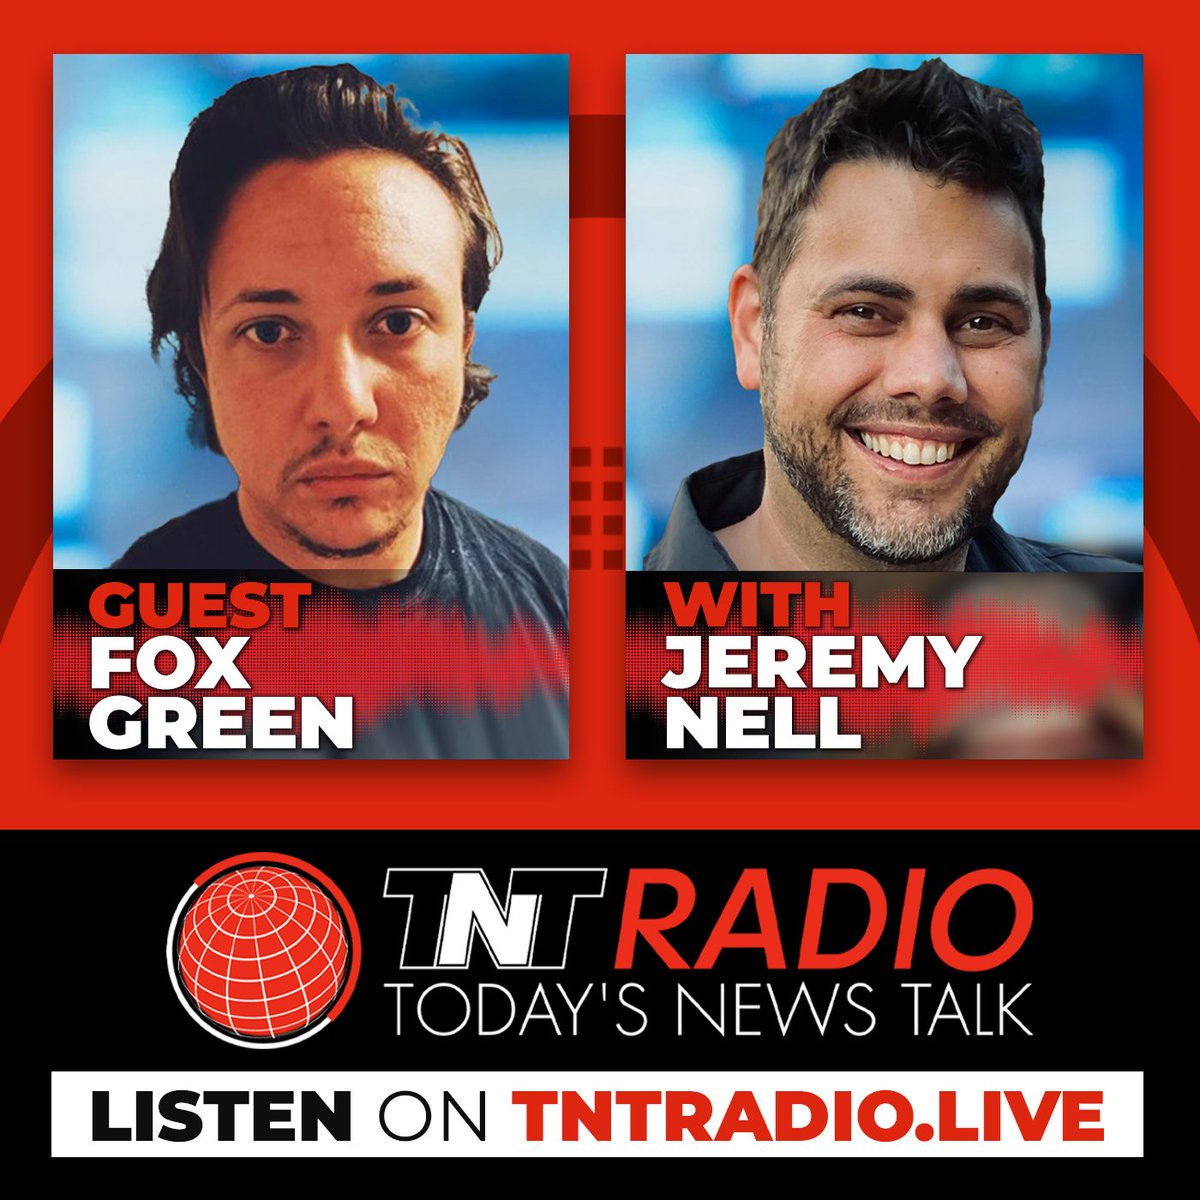 Writer and Producer at SpaceCommune Fox Green next on Jerm Warfare with Jeremy Nell on TNT Radio.
#listenlive tntradio.live @FoxGGreen @SpaceCommune 
MIDNIGHT (BRISBANE) 3PM (LONDON) 10AM (NEW YORK)
#tntradiolive #24hournewsradio